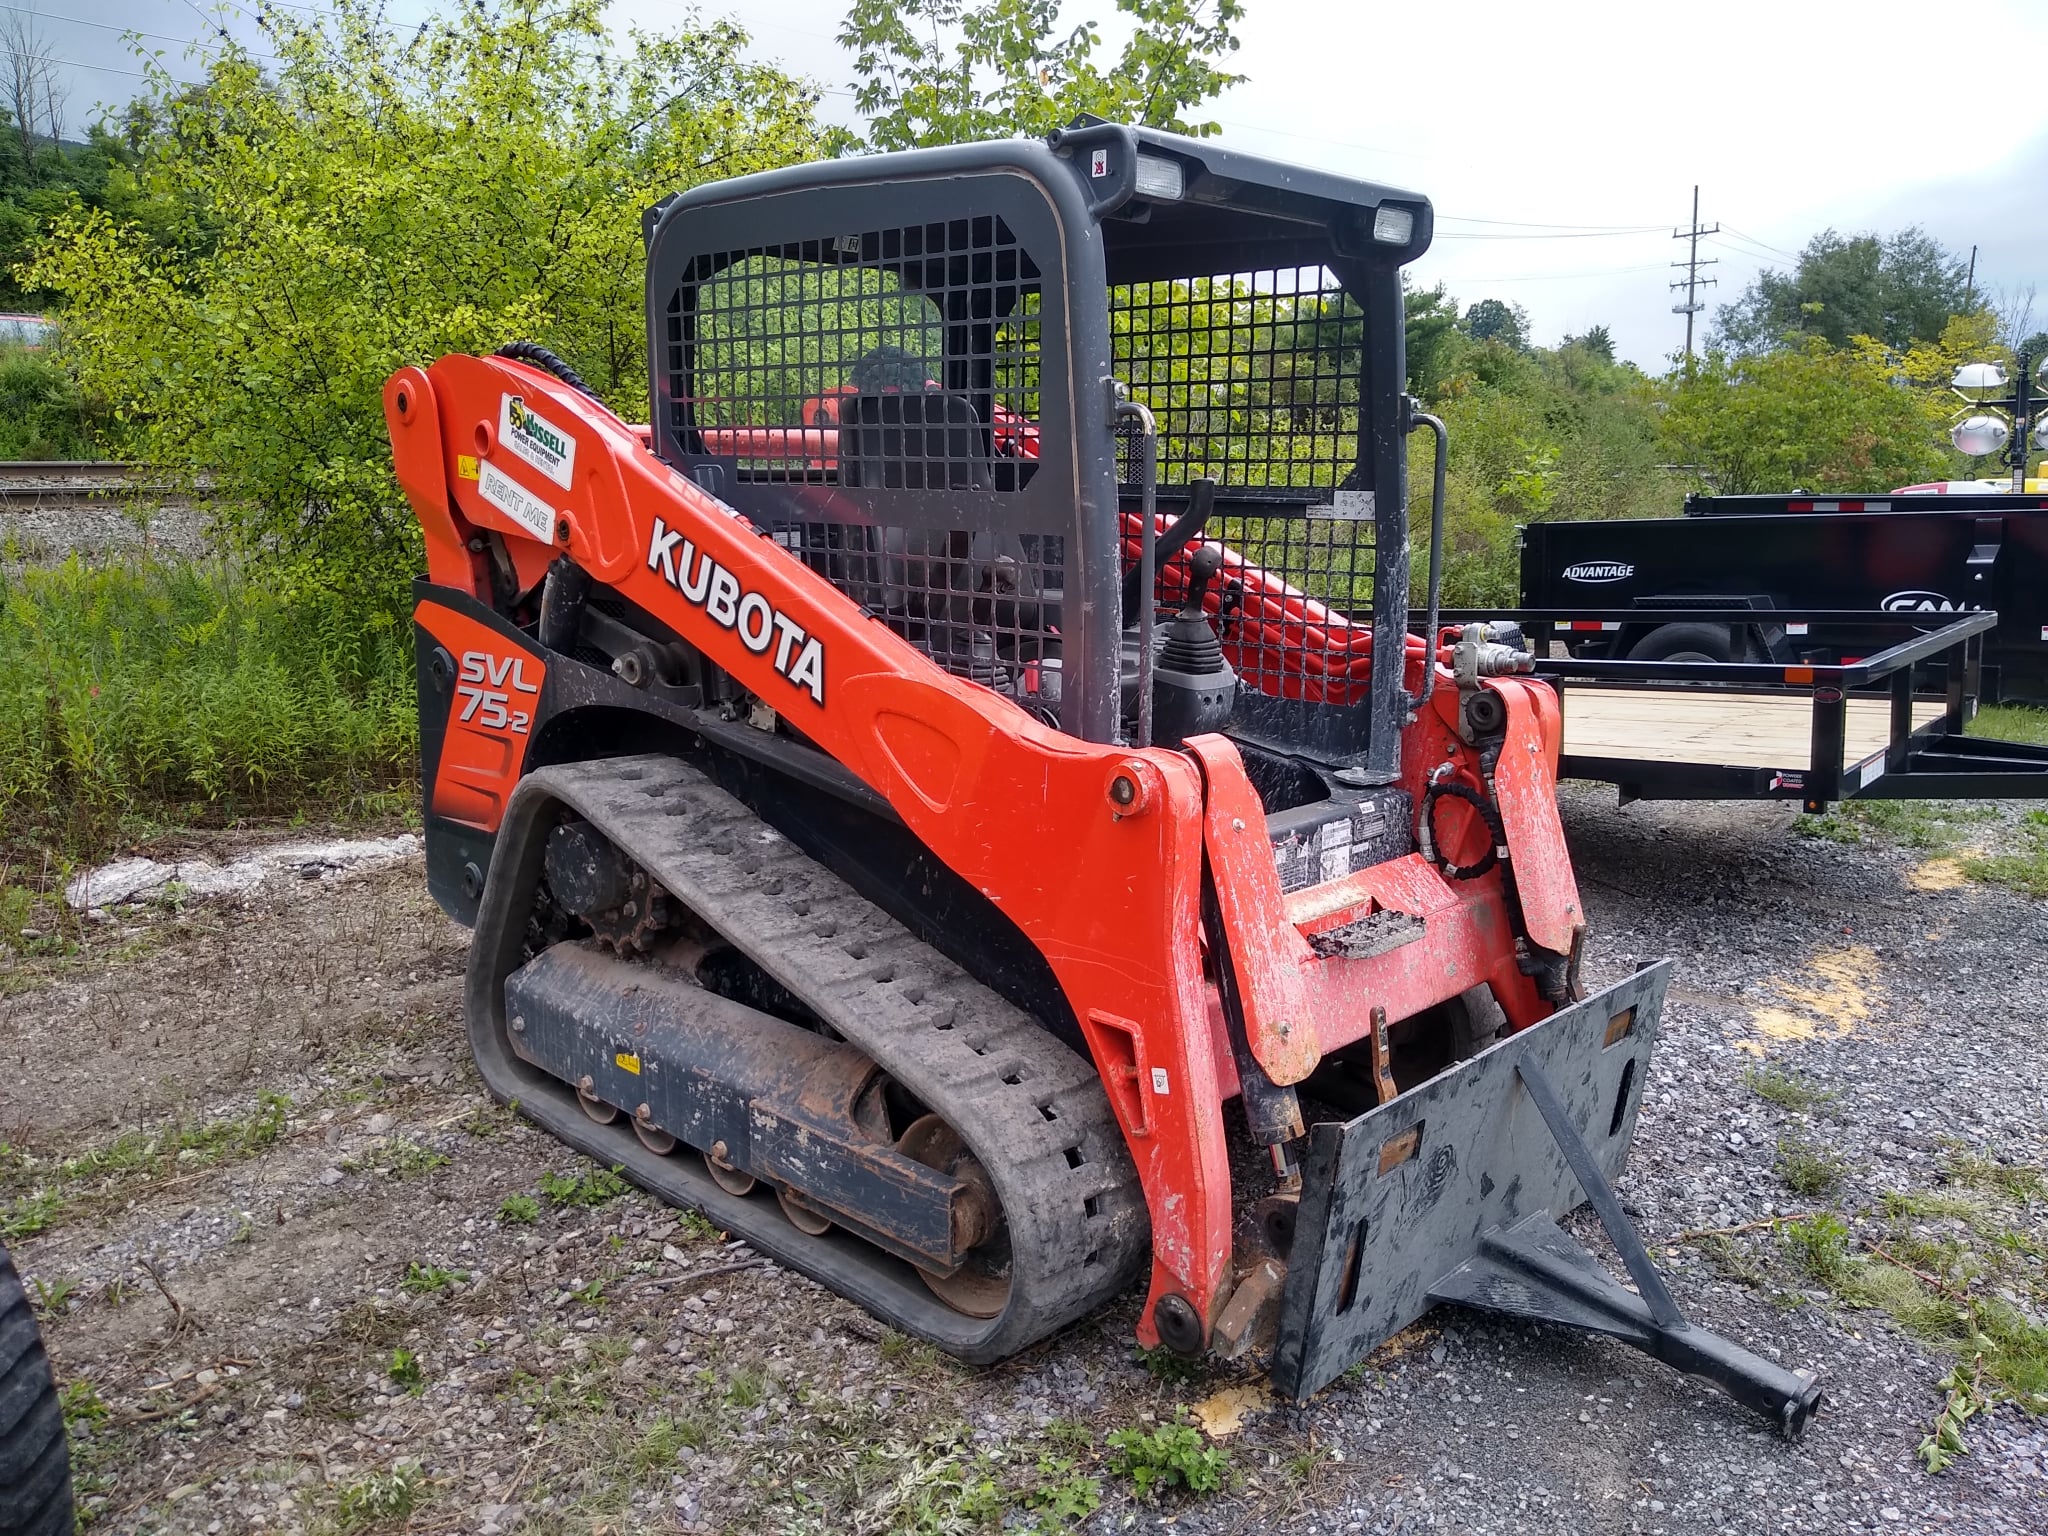 A Kubota skid steer with tracks is sitting in front of a row of bushes. The orange machine has an opening for attachments on the front. 